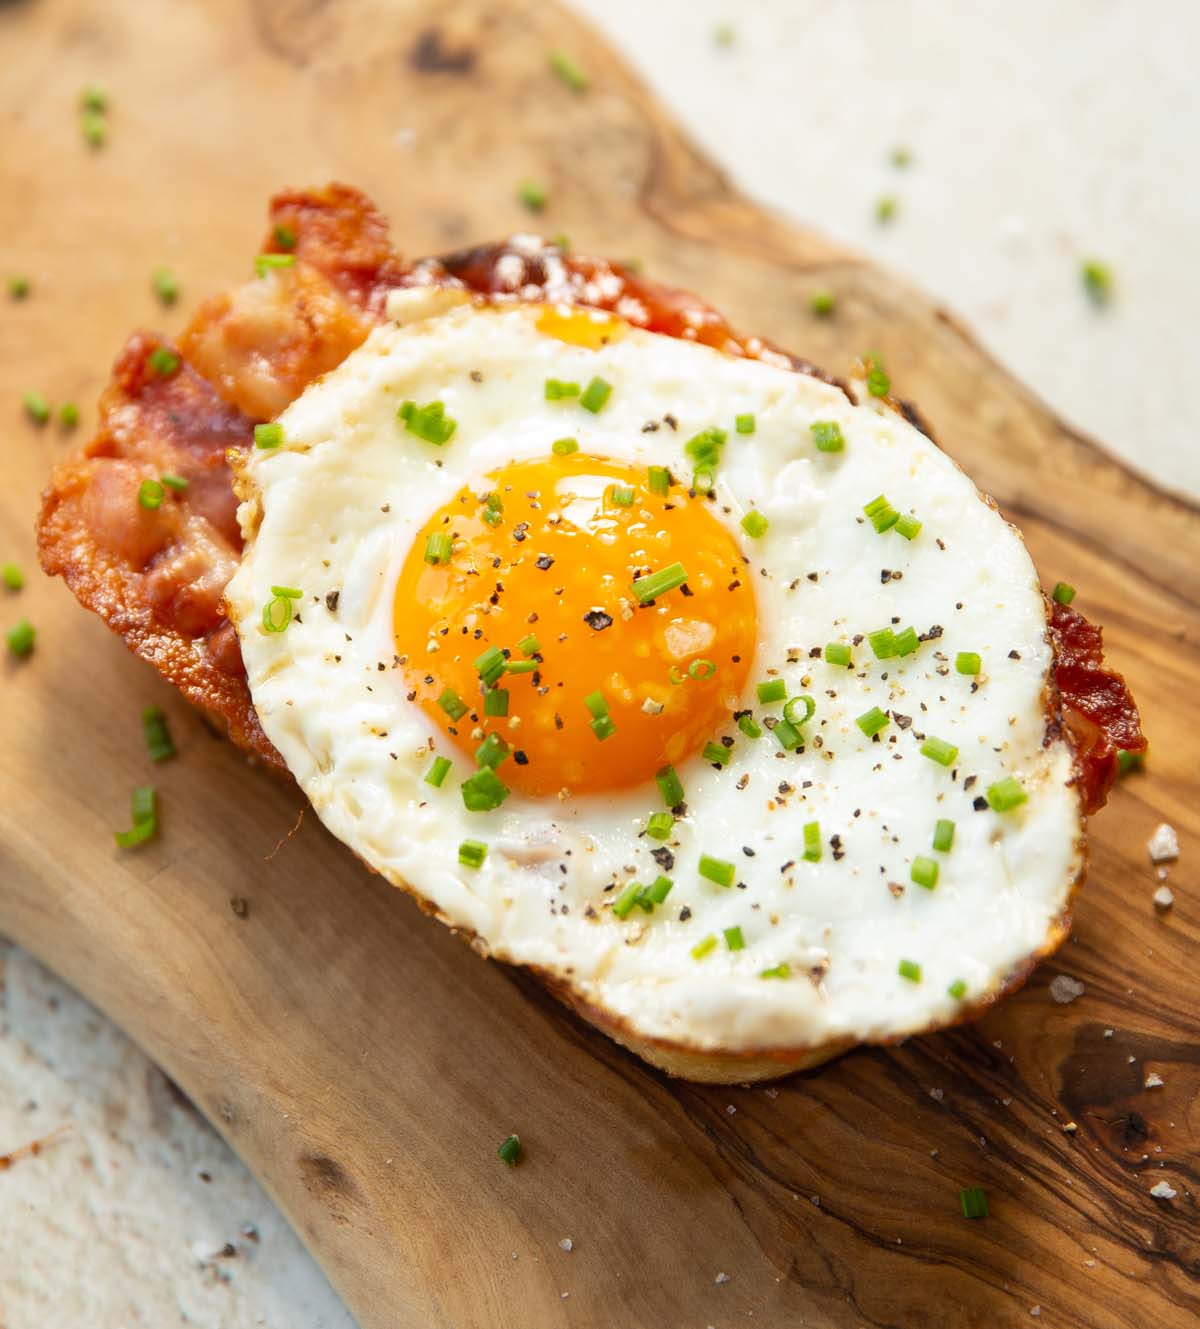 https://www.dontgobaconmyheart.co.uk/wp-content/uploads/2022/04/egg-and-bacon-on-toast.jpg